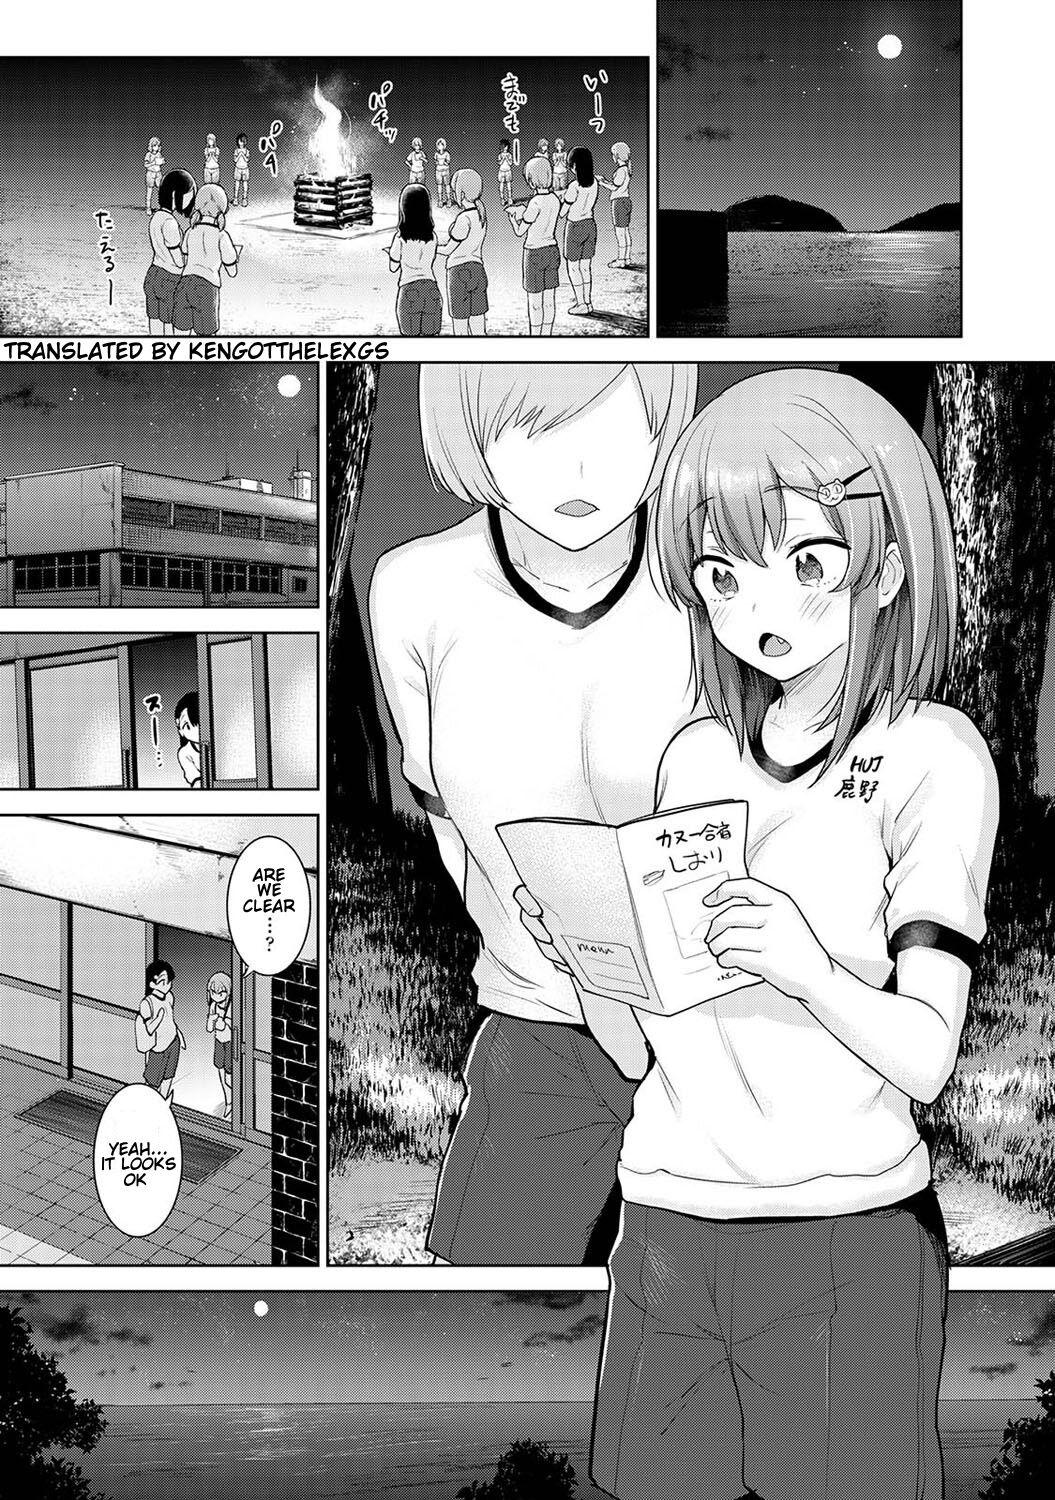 Fuck Porn SotsuAl Cameraman to Shite Ichinenkan Joshikou no Event e Doukou Suru Koto ni Natta Hanashi | A Story About How I Ended Up Being A Yearbook Cameraman at an All Girls' School For A Year Ch. 7 Humiliation - Page 2